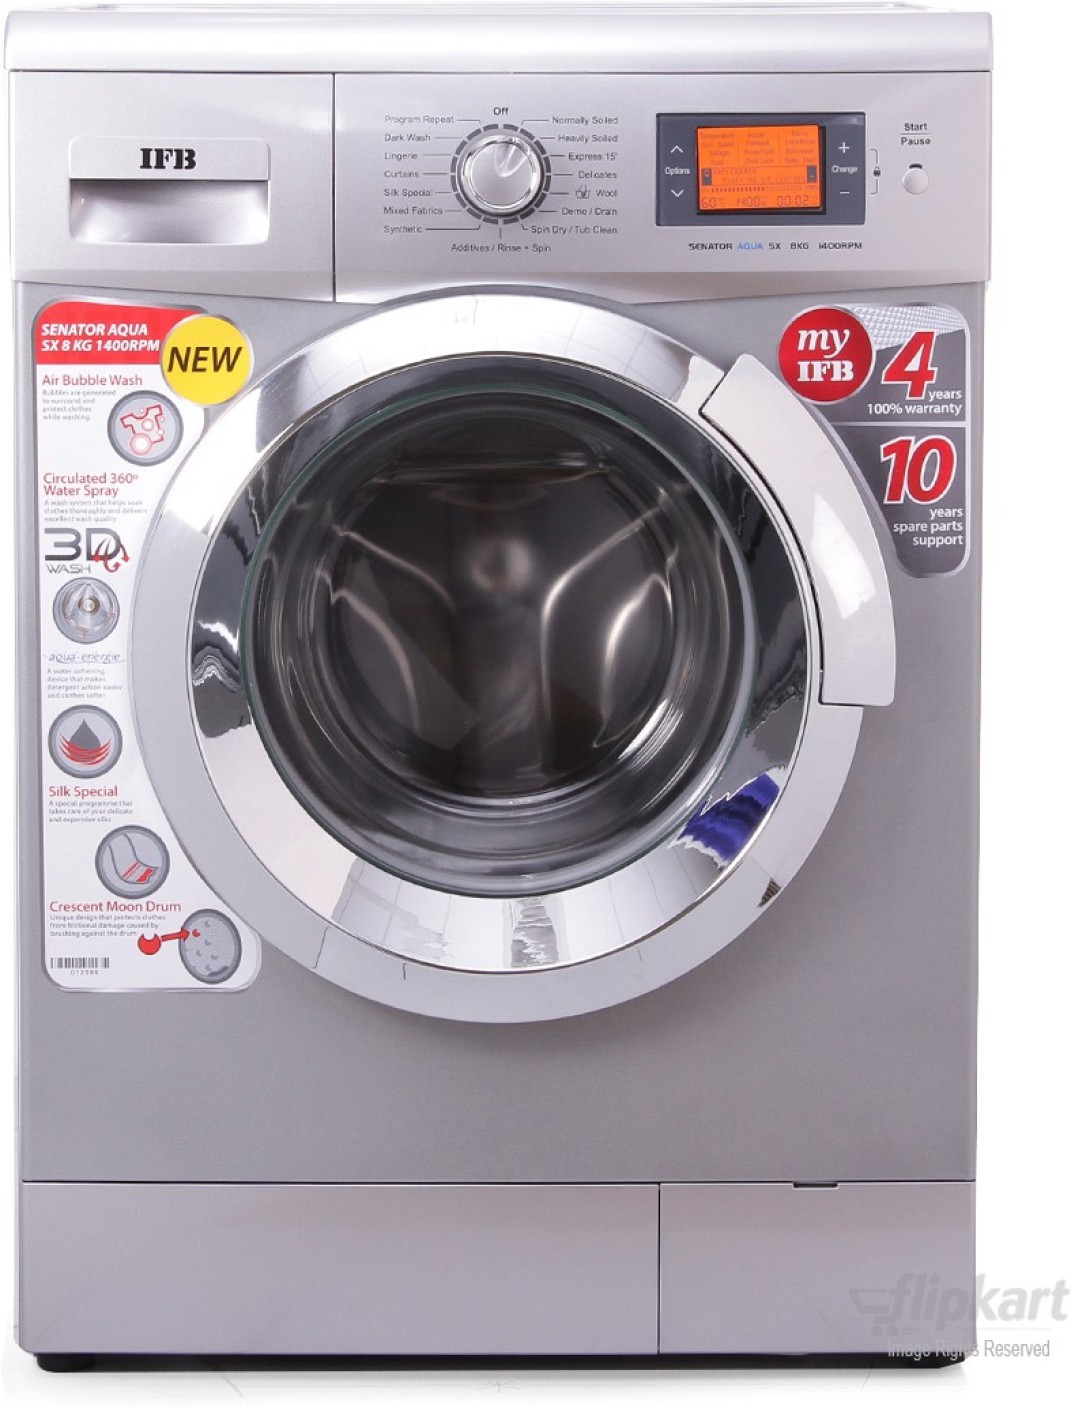 Best front loading washing machine in india